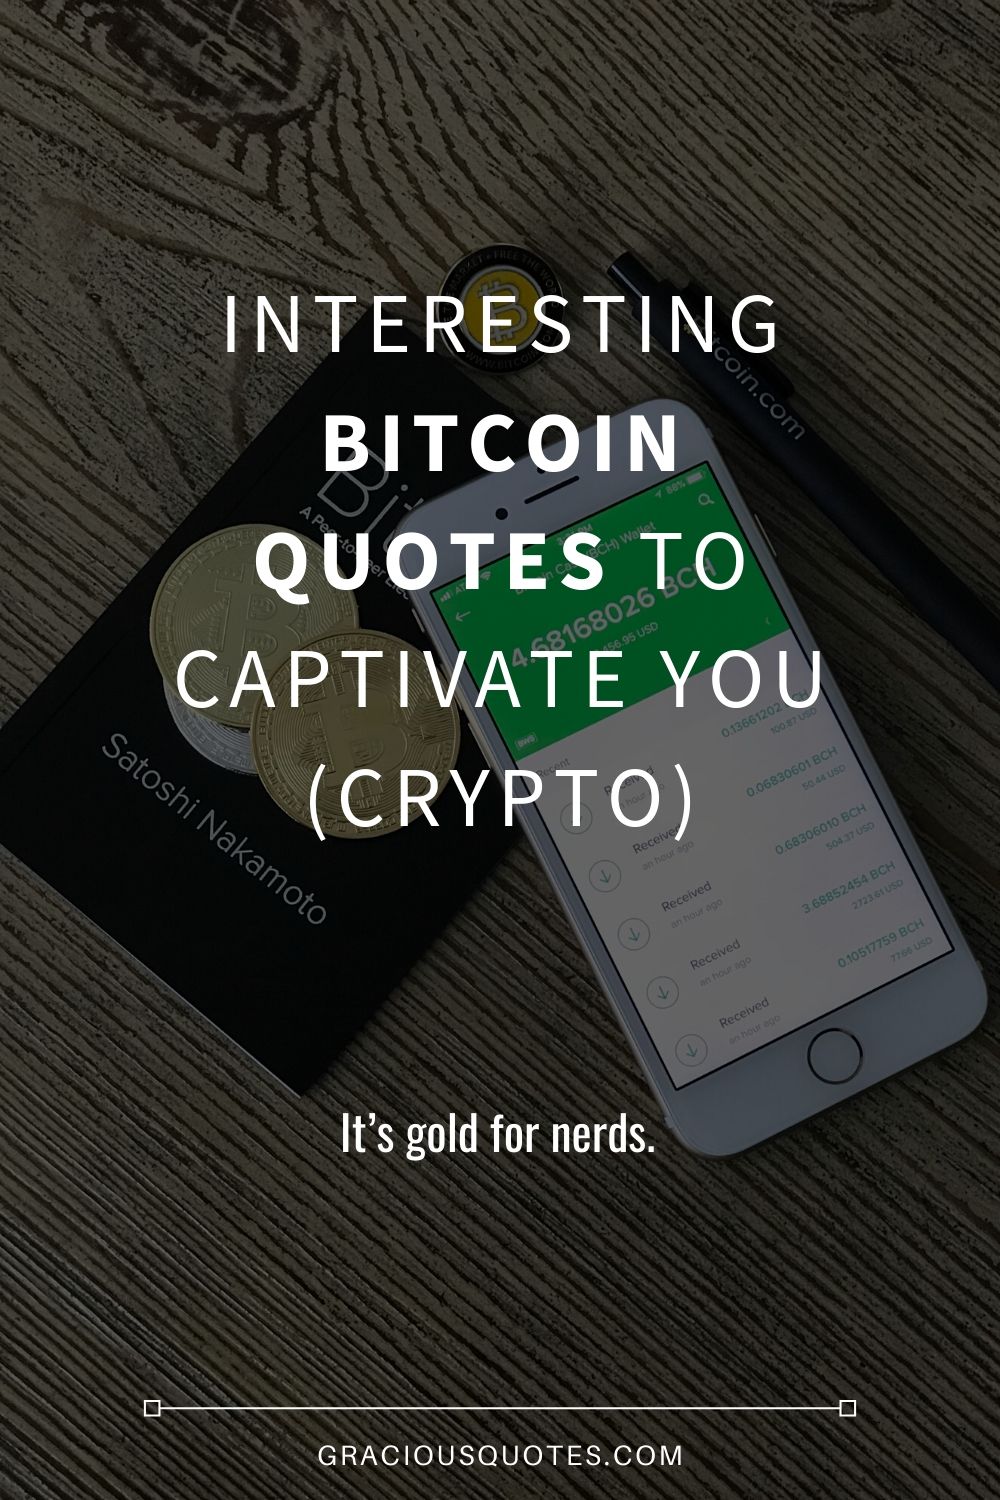 Interesting-Bitcoin-Quotes-to-Captivate-You-CRYPTO-Gracious-Quotes